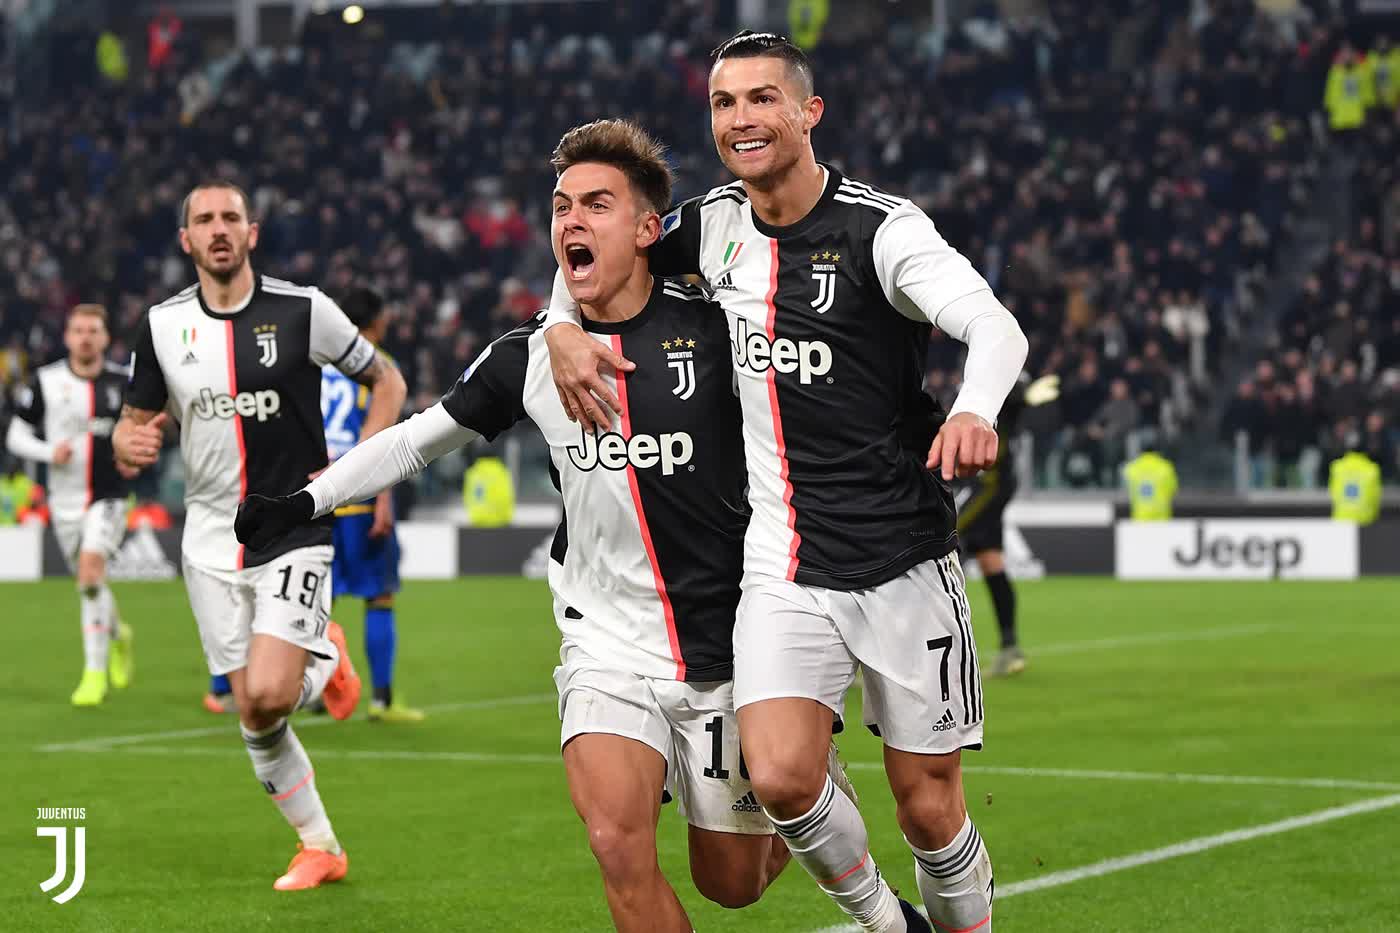 Juventus: A Football Team With Long-Term Potential (OTCMKTS:JVTSF ...